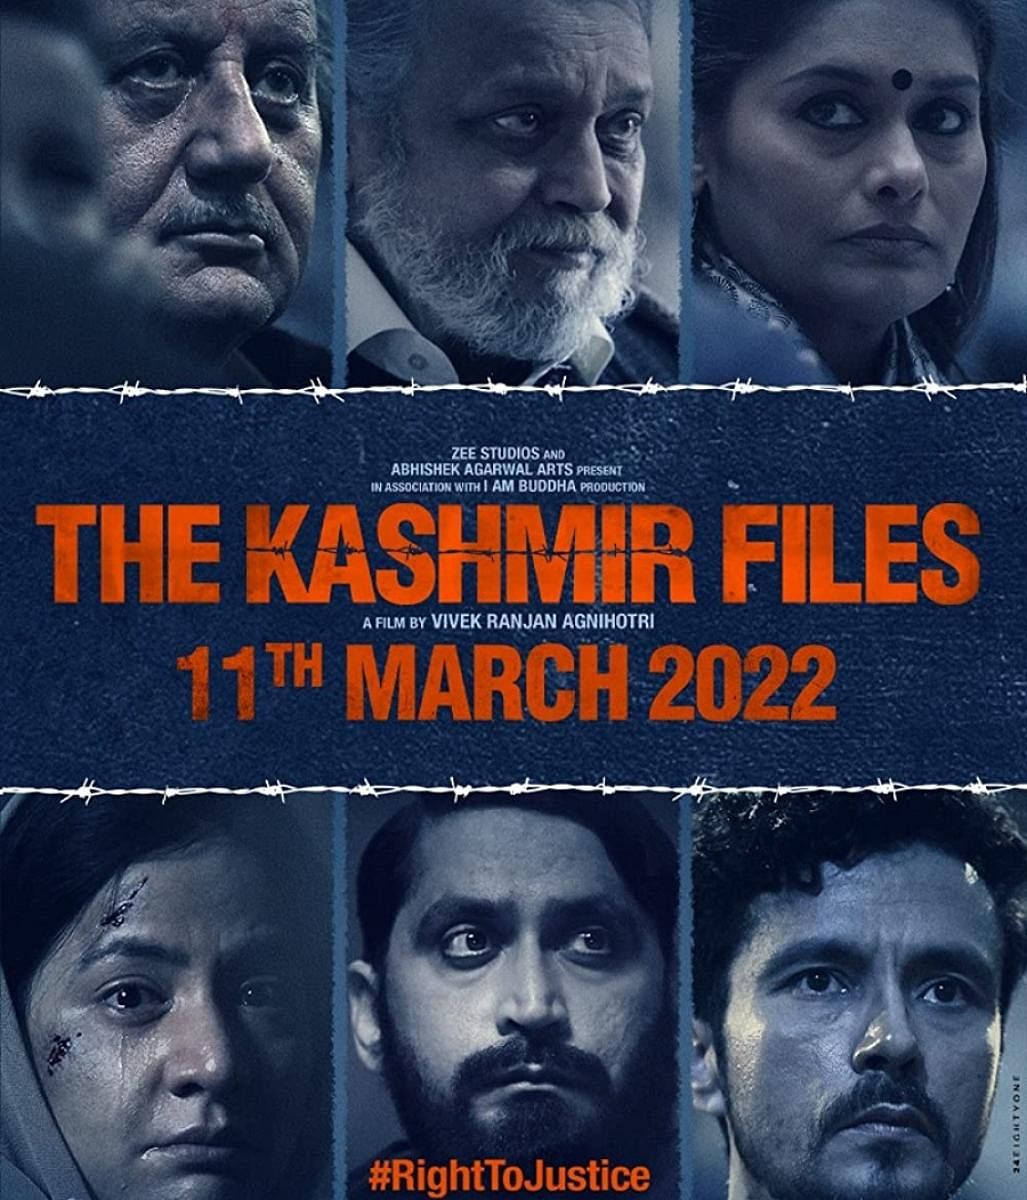 The distorted view of 'The Kashmir Files'